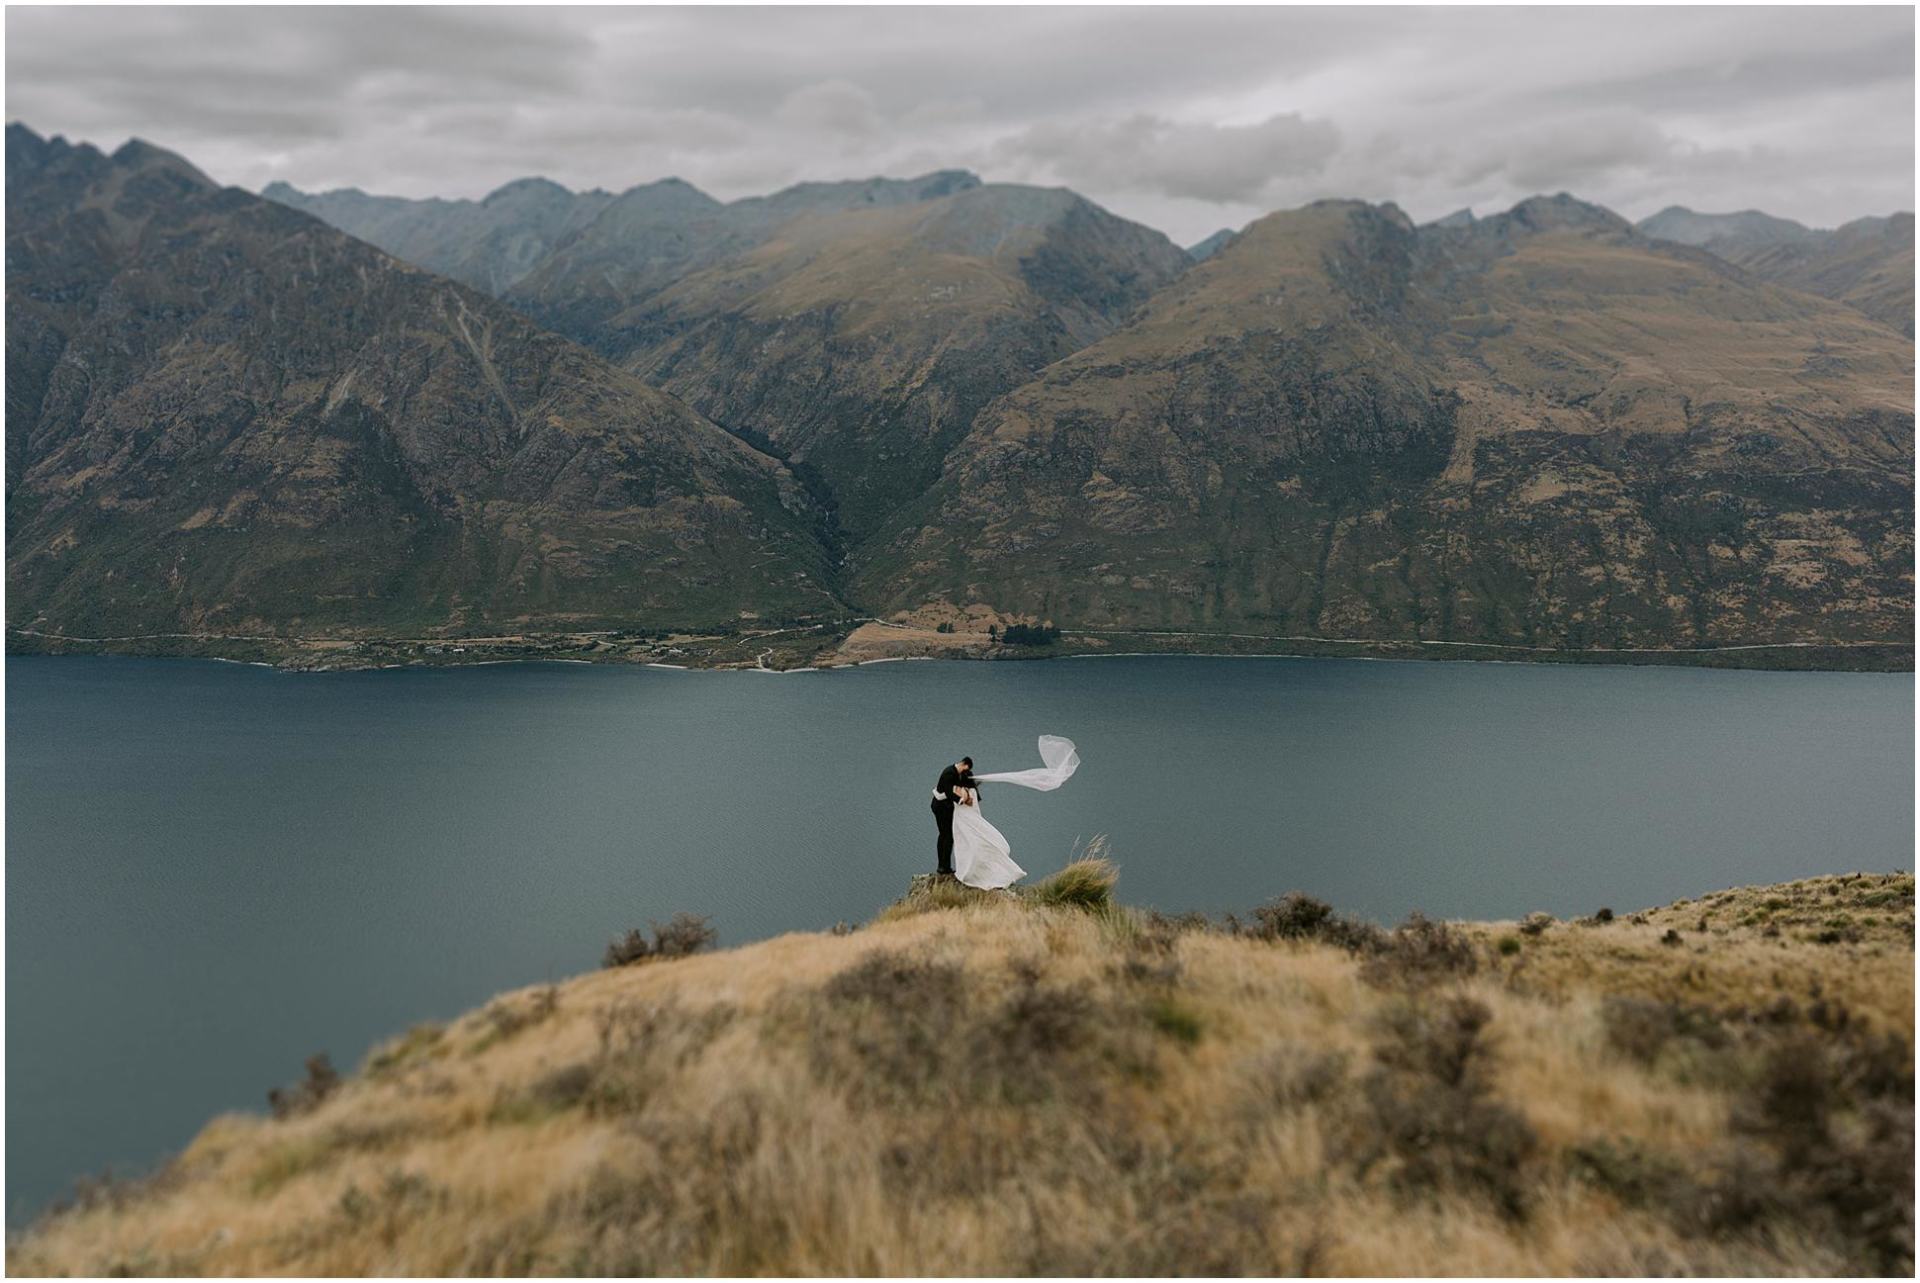 Charlotte Kiri Photography - Wedding Photography a breathtaking shot of a bride embracing her groom as her veil floats behind her on top of Coromandel Peak with an expanse of lakes and mountains behind in Wanaka, New Zealand.